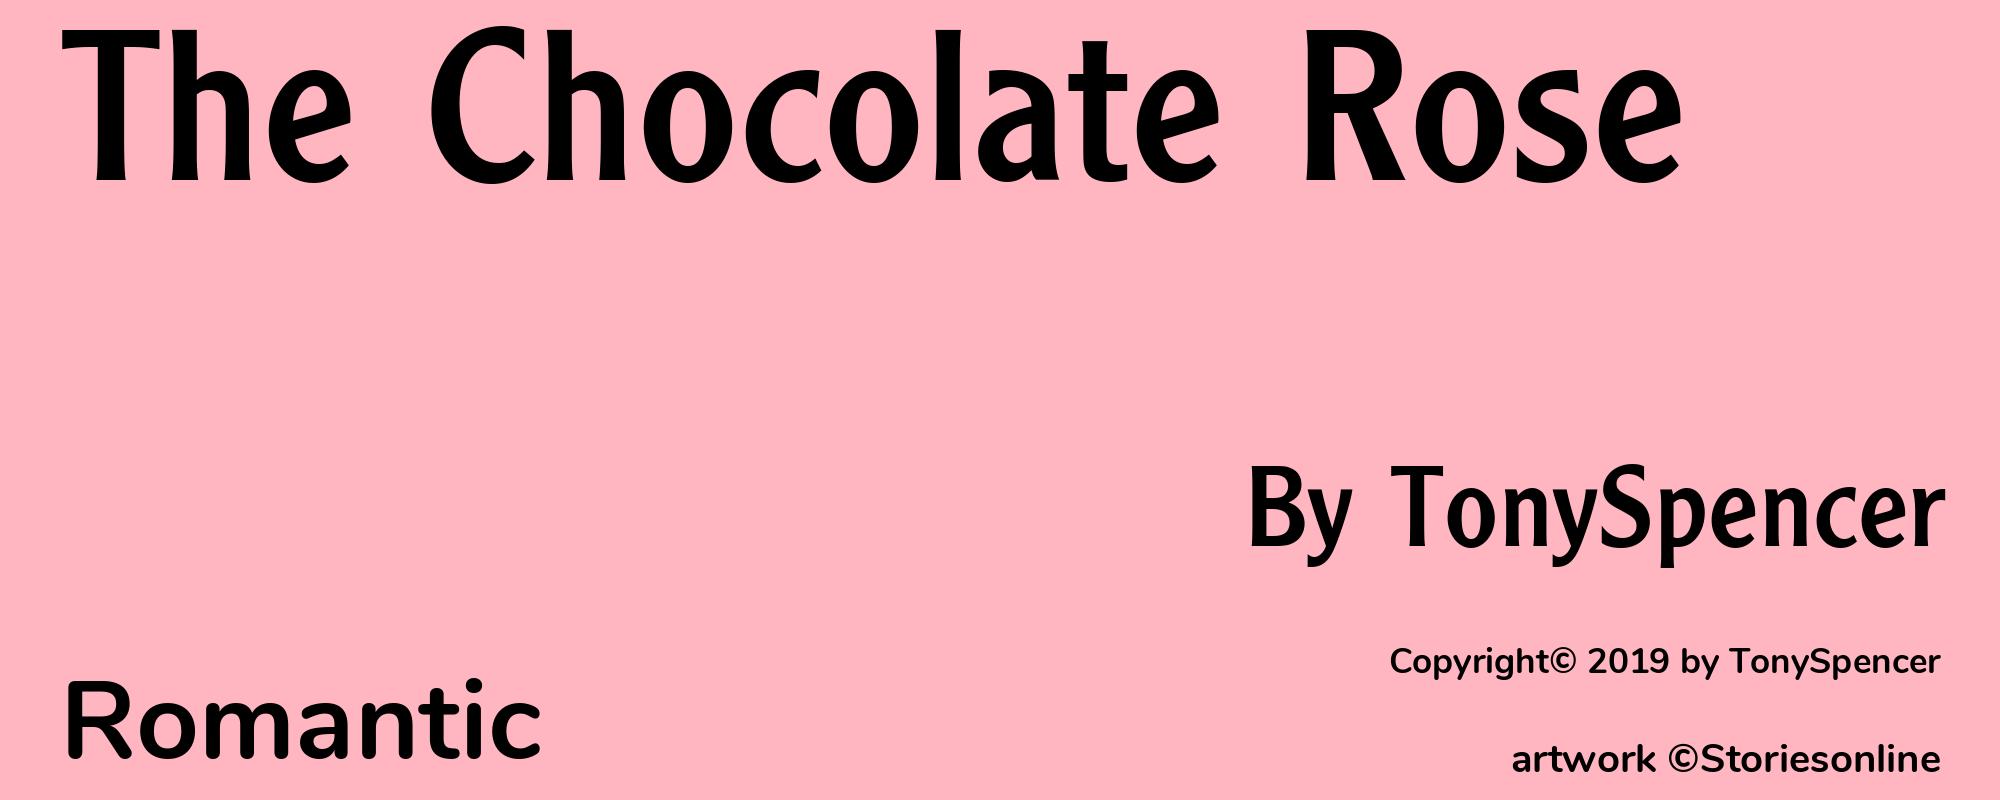 The Chocolate Rose - Cover